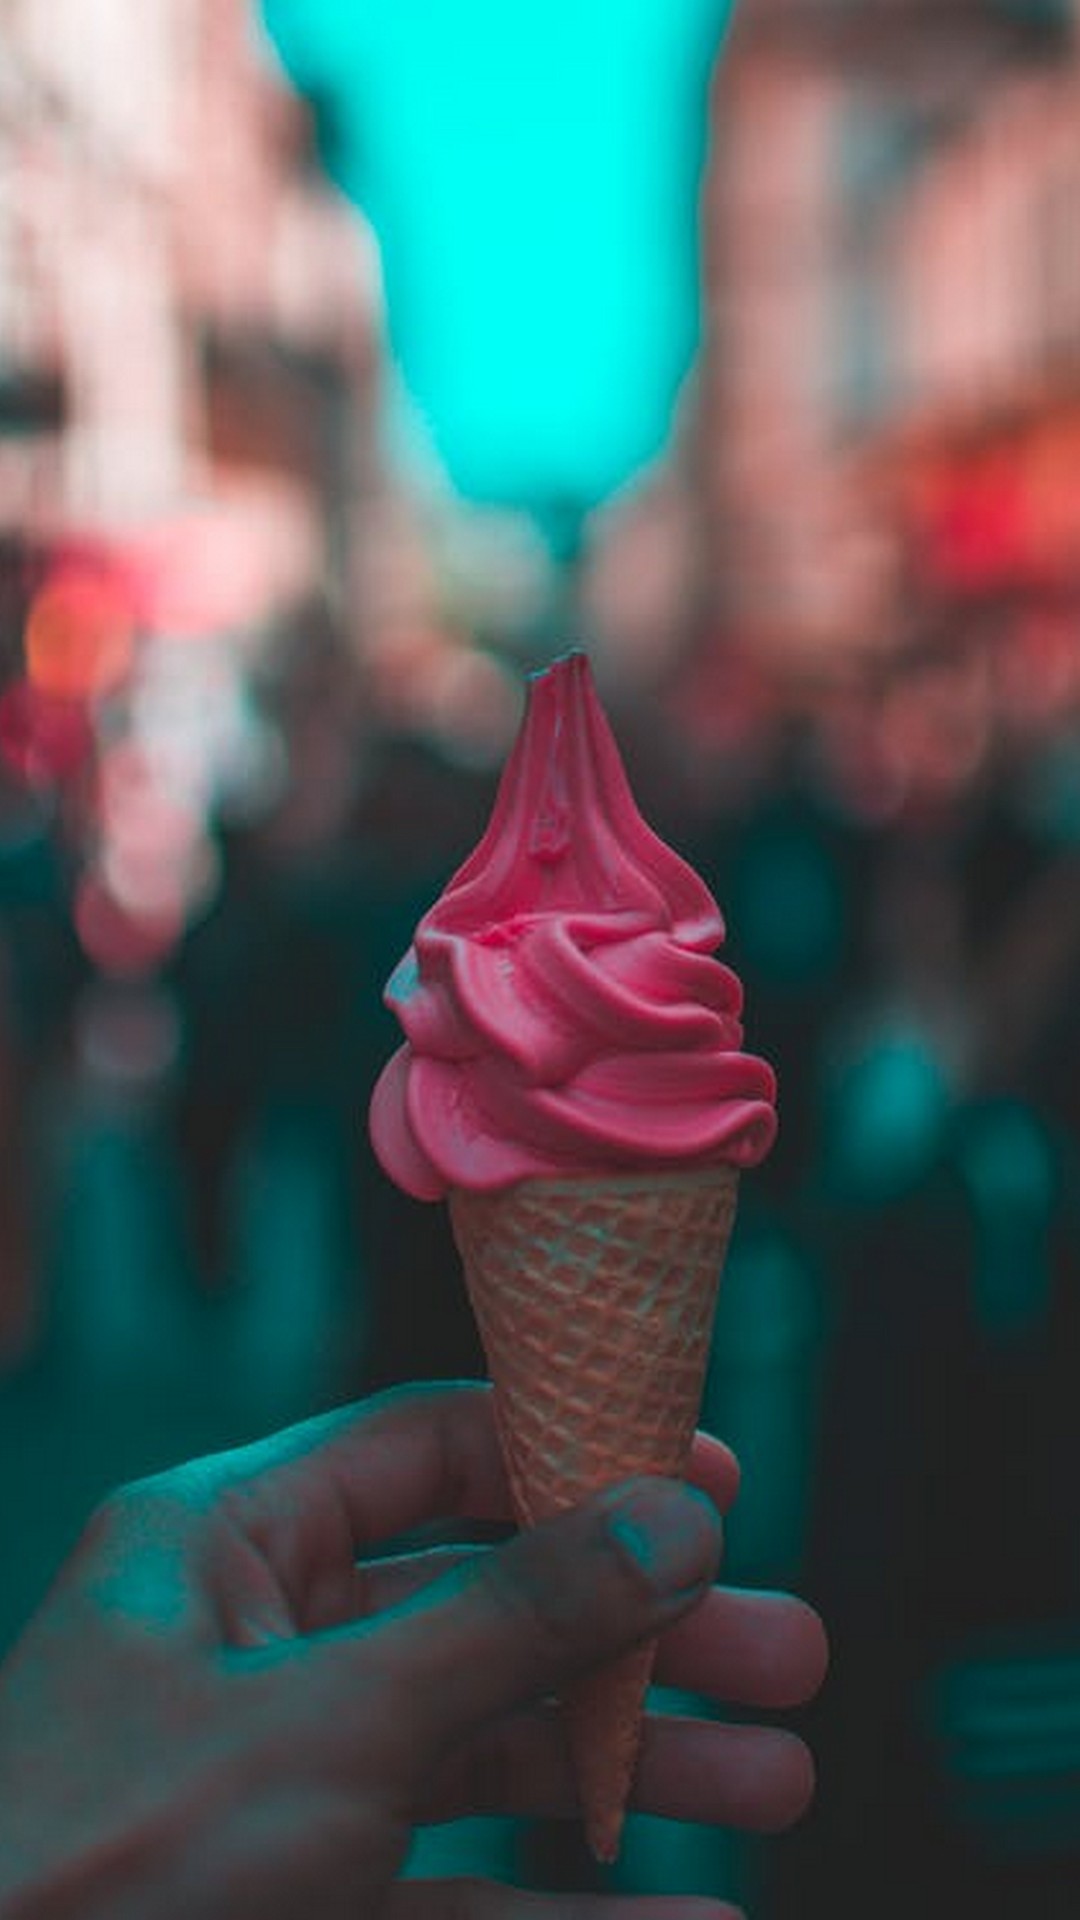 Ice Cream iPhone Wallpaper Home Screen with high-resolution 1080x1920 pixel. You can set as wallpaper for Apple iPhone X, XS Max, XR, 8, 7, 6, SE, iPad. Enjoy and share your favorite HD wallpapers and background images